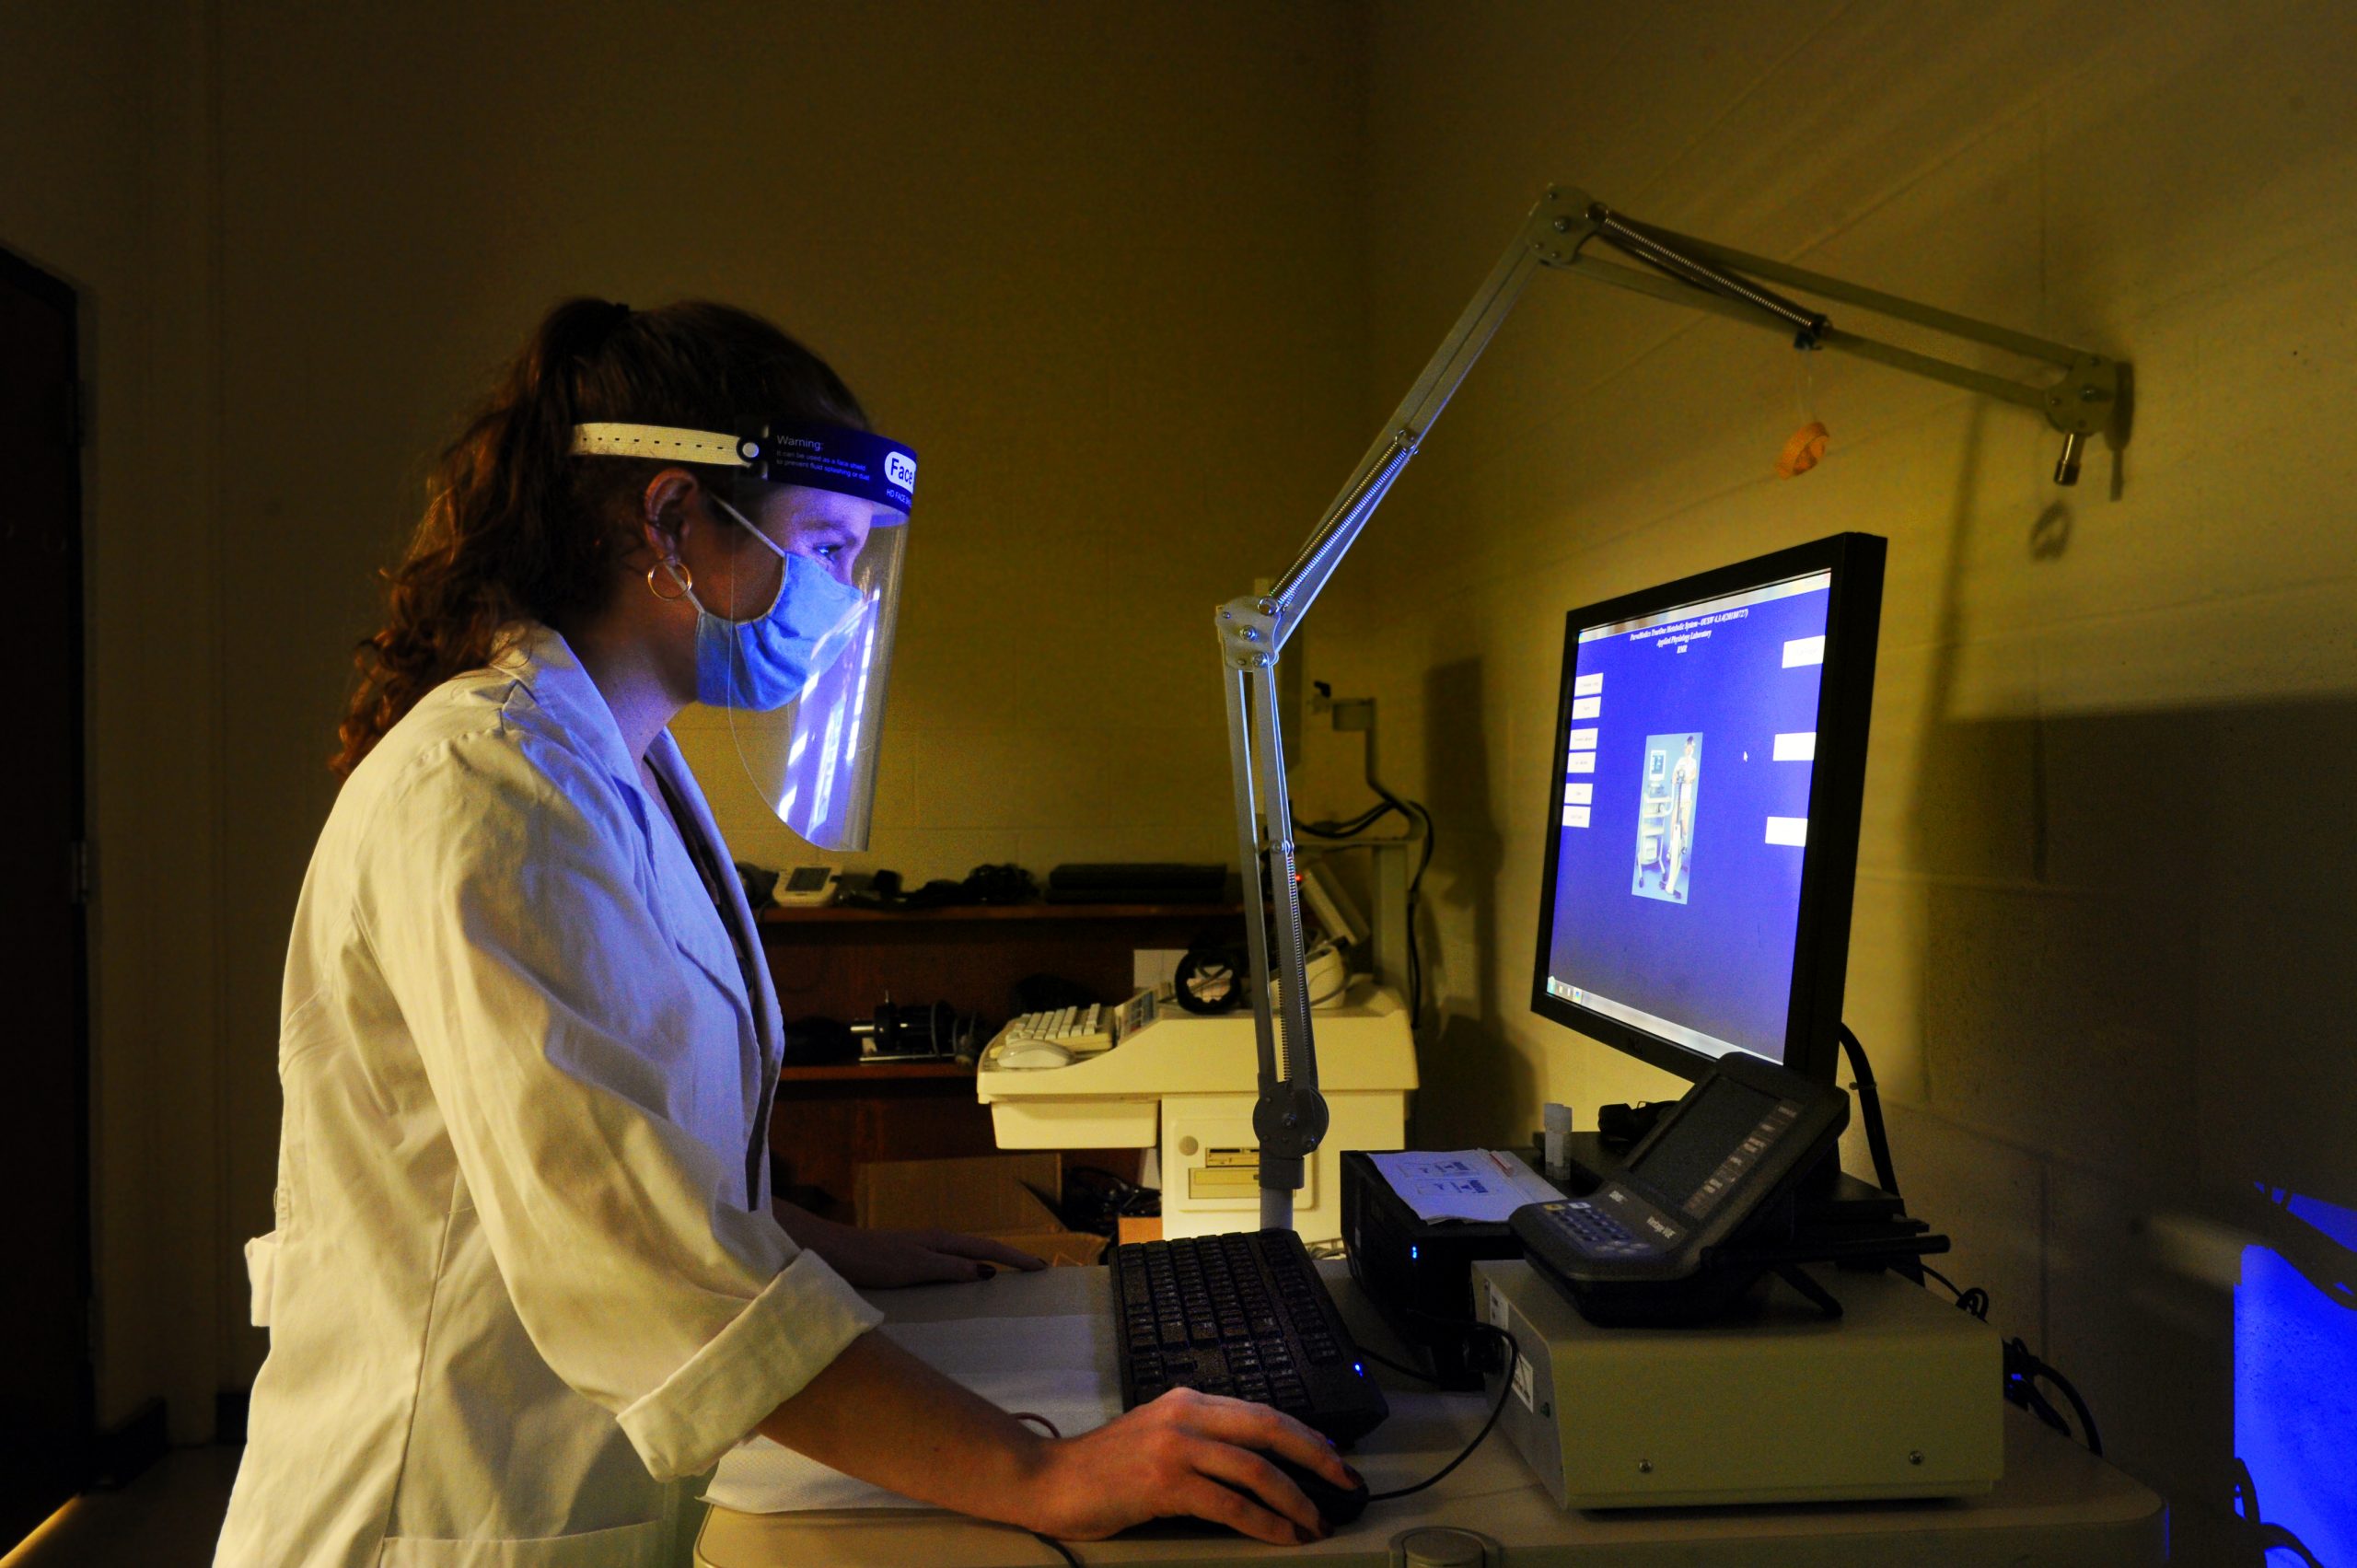 Undergraduate Alyson Nelson is in a white lab coat with a protective face shield doing research on metabolism and body composition. (photo by Donn Young)